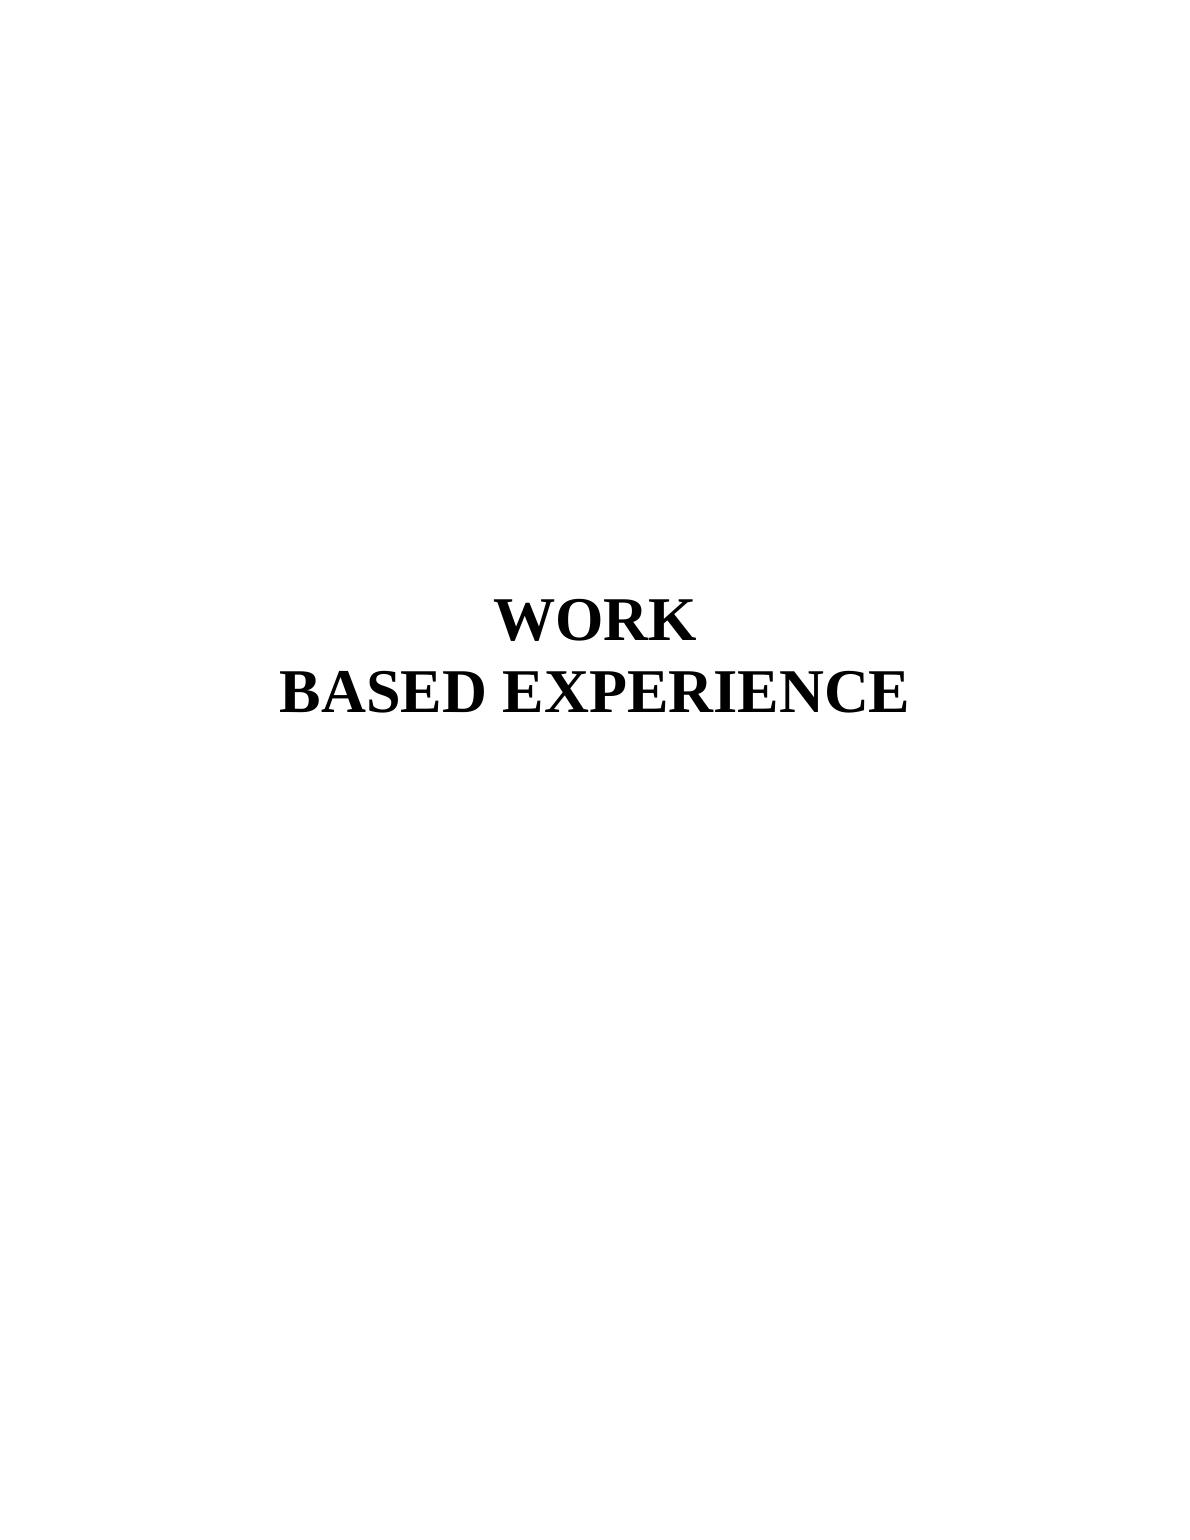 Aspect of Work Based Learning - Report_1